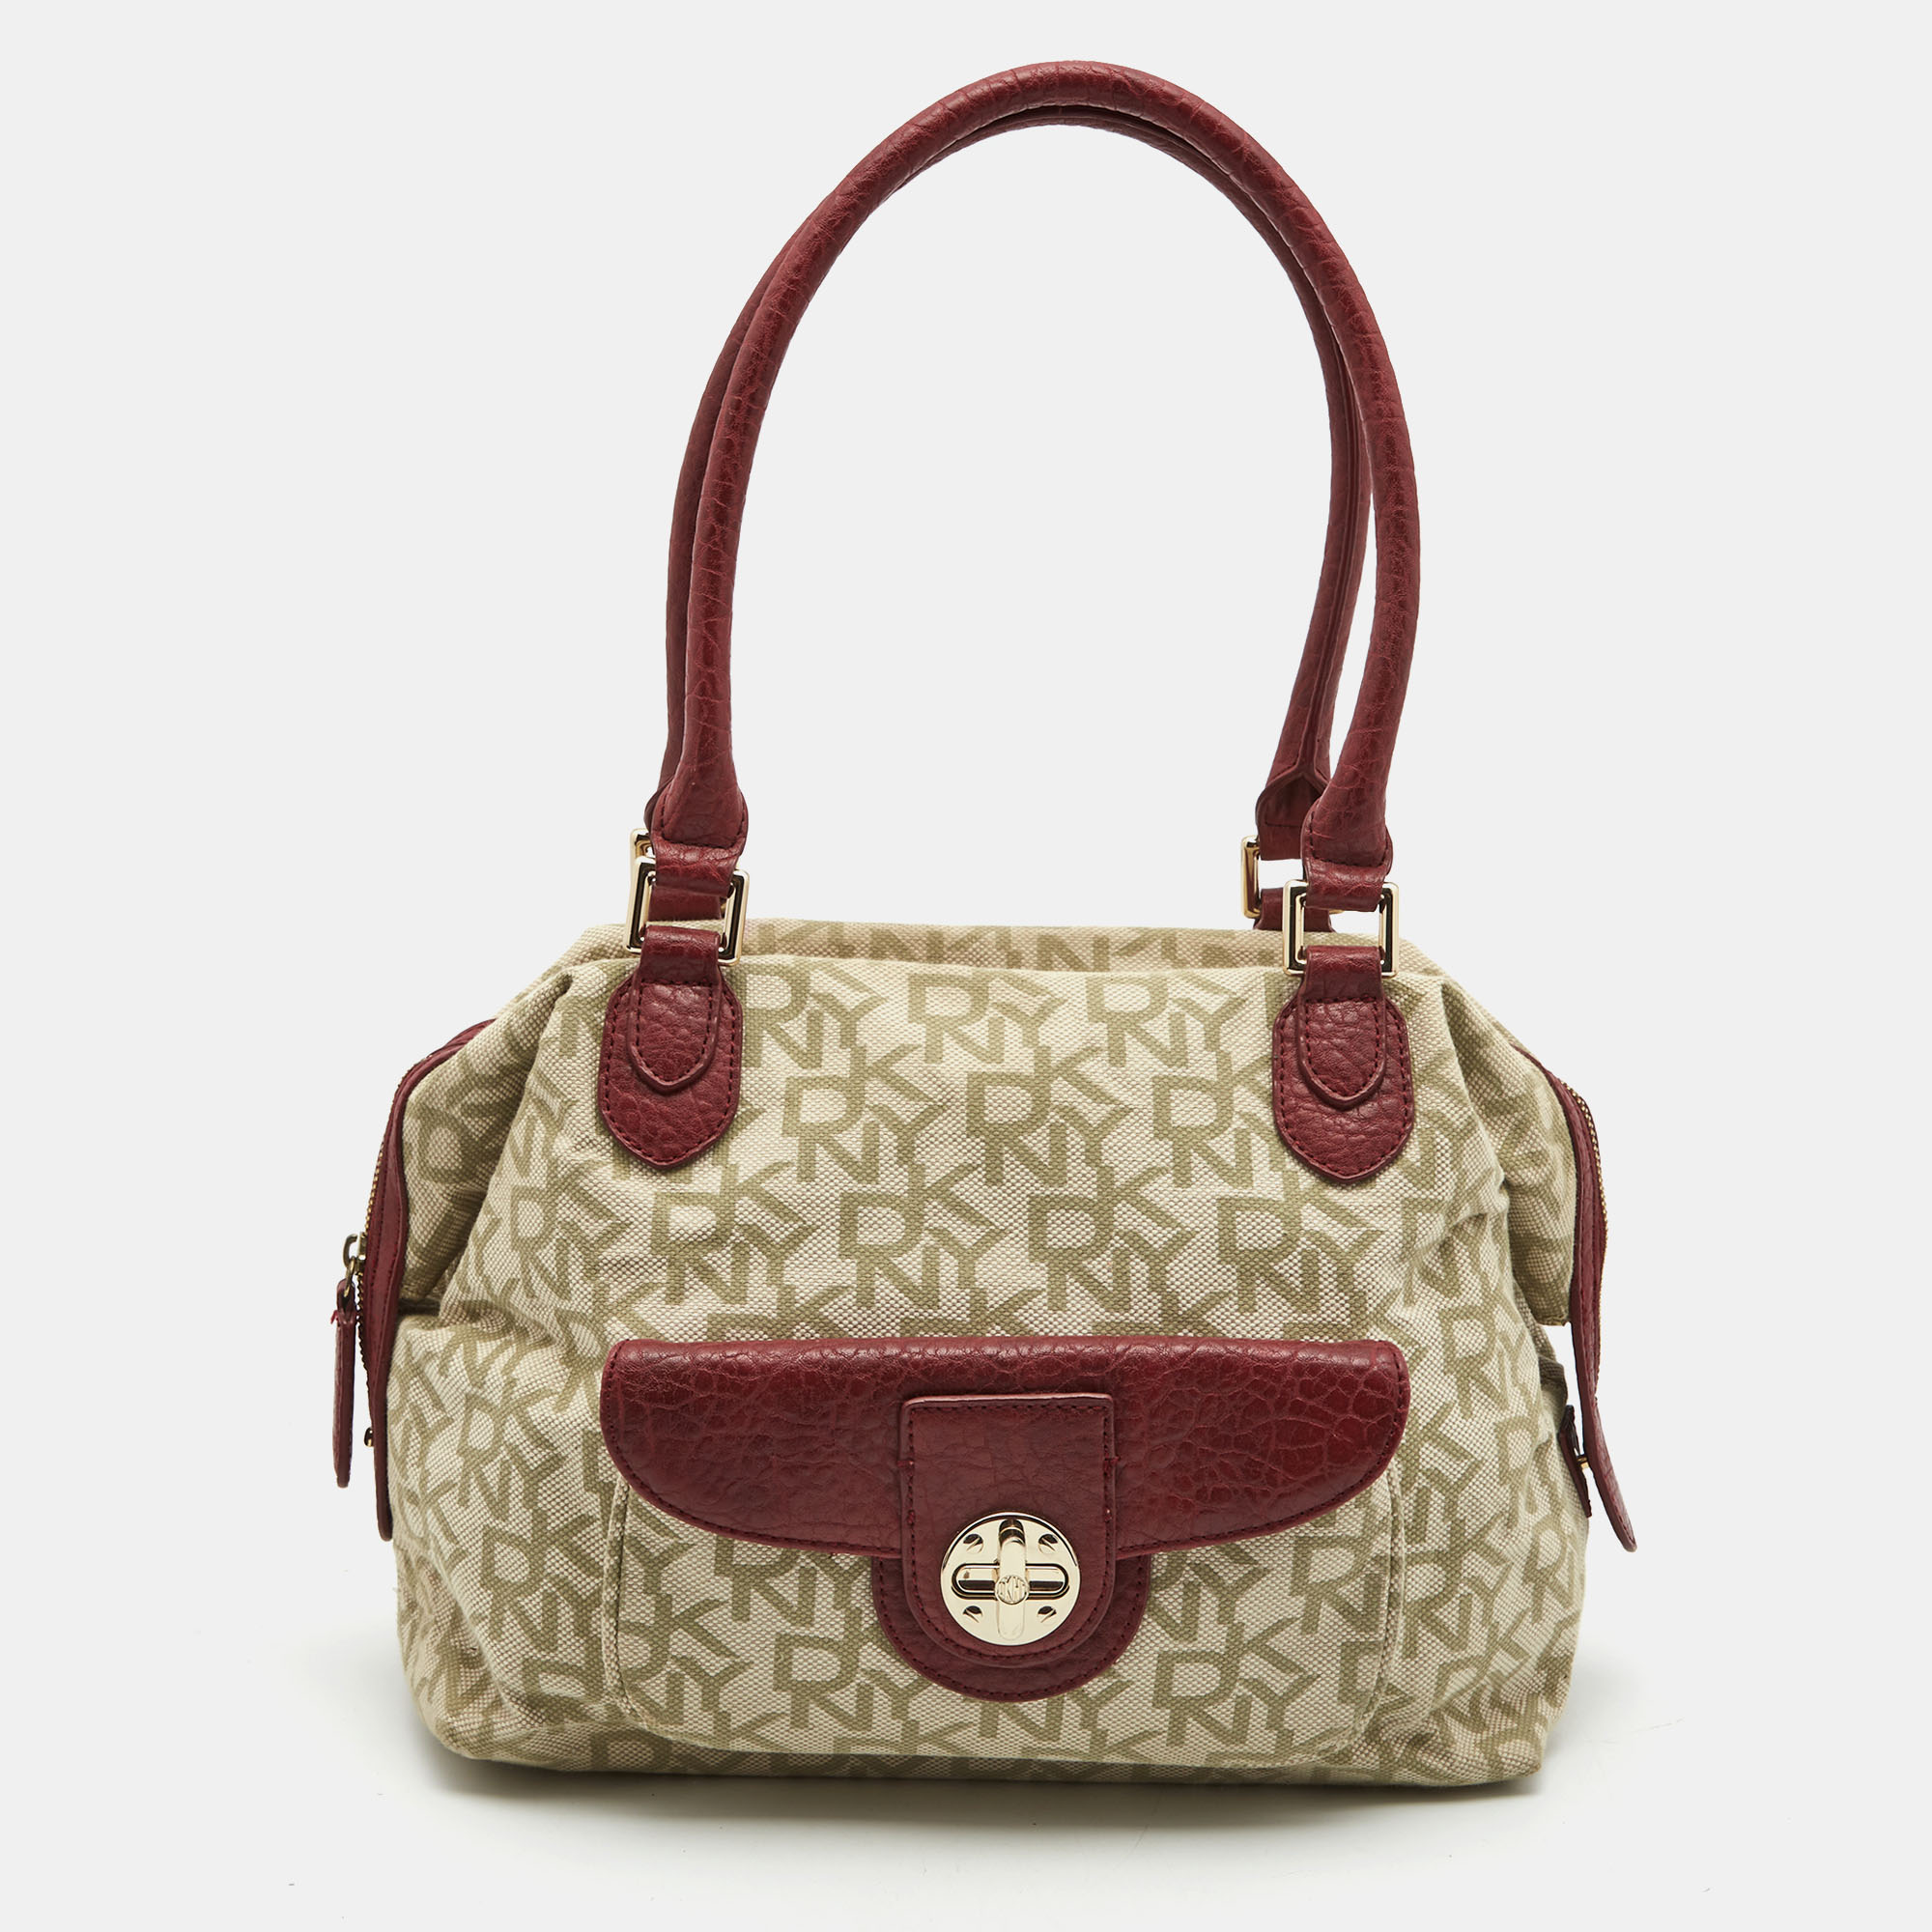 The simple silhouette and the use of monogram canvas and leather for the exterior bring out the appeal of this DKNY satchel. It features dual handles gold tone hardware and a fabric lined interior.